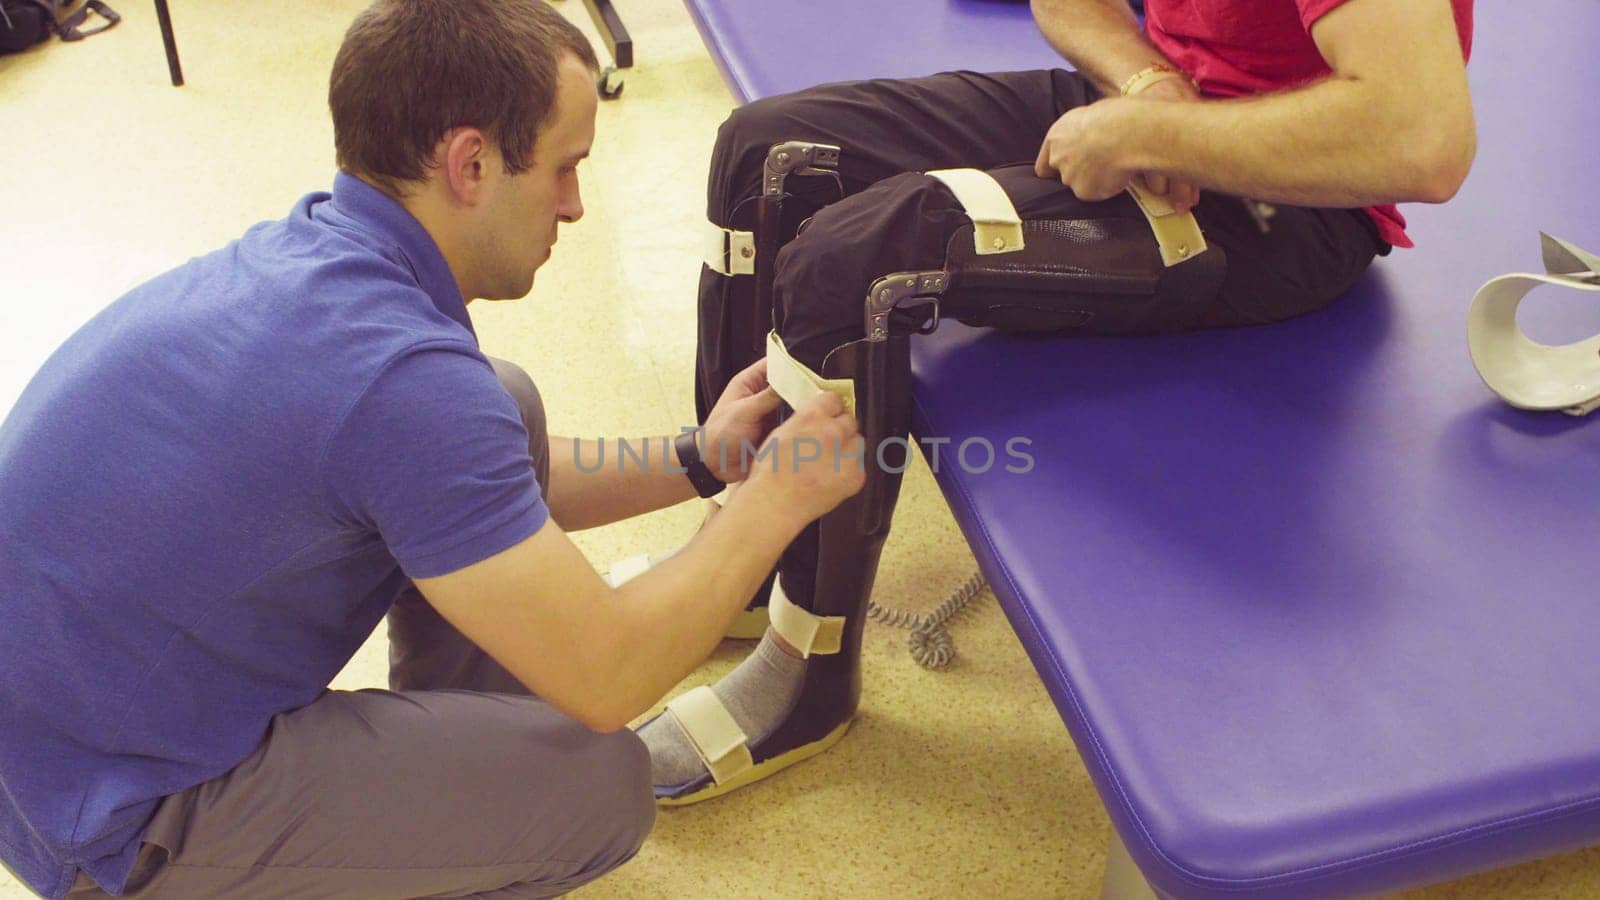 Doctor physiotherapist putting the orthosis on the legs of young disable man in the rehabilitation clinic. Patient helping him